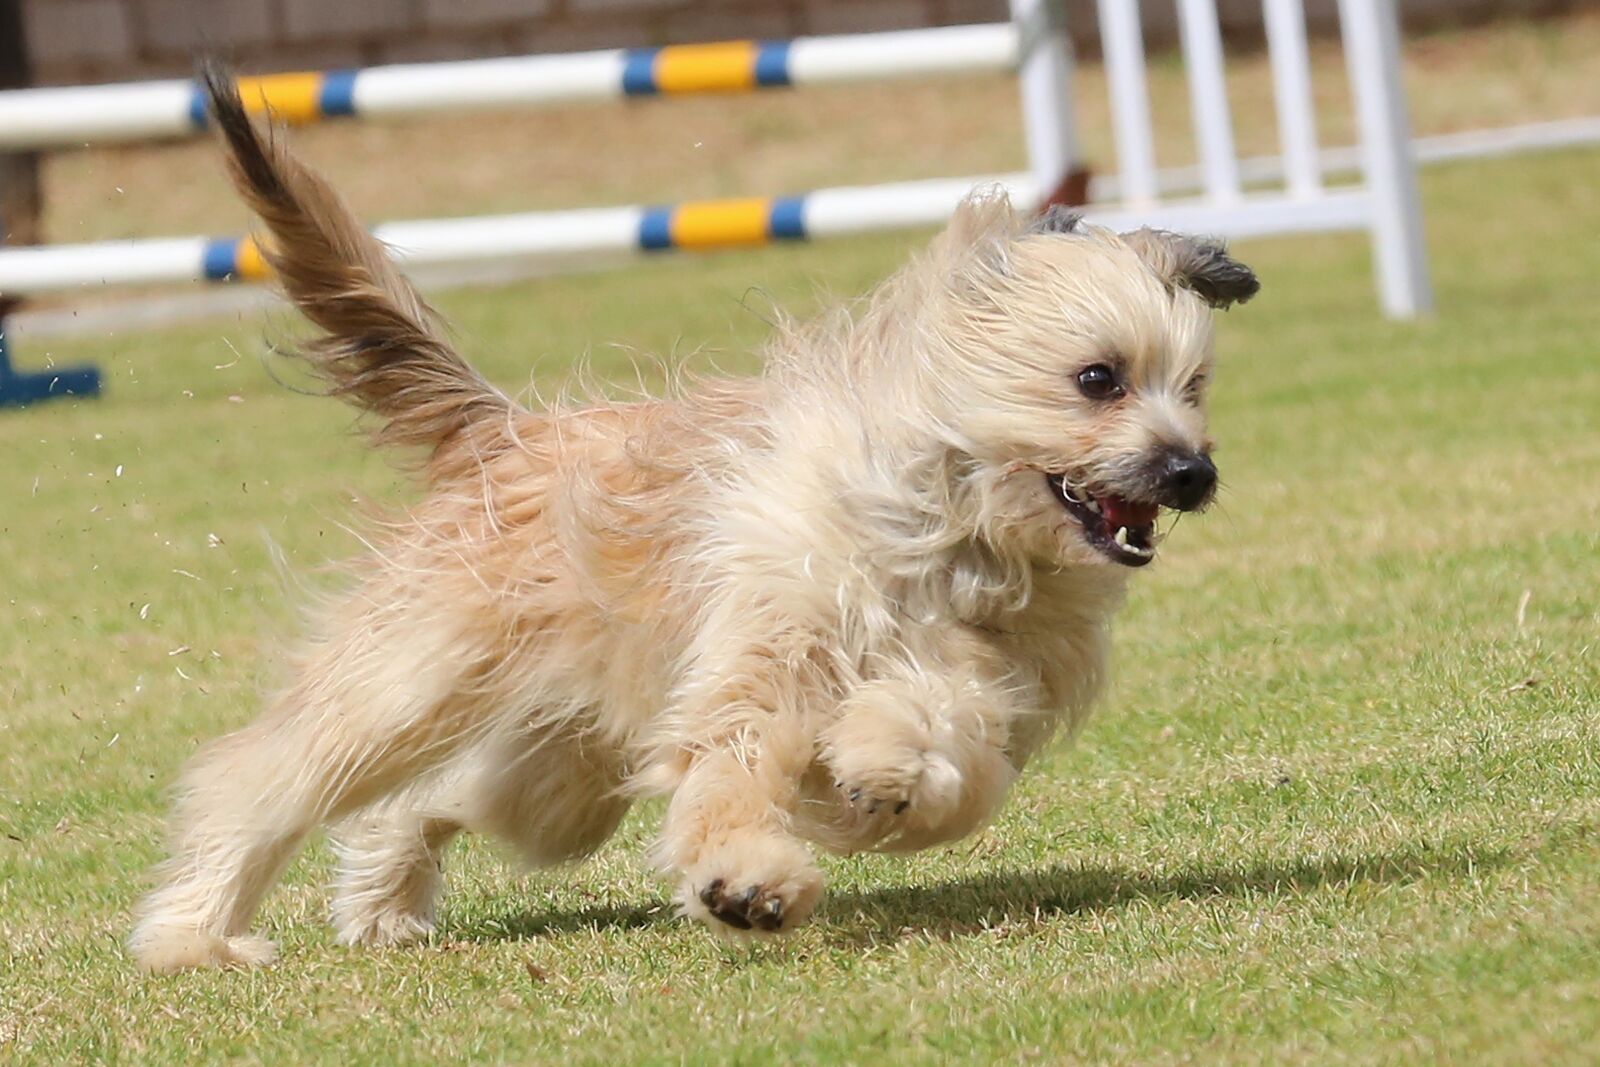 150-600mm F5-6.3 DG OS HSM | Sports 014 sample photo. Dog, competition, running photography